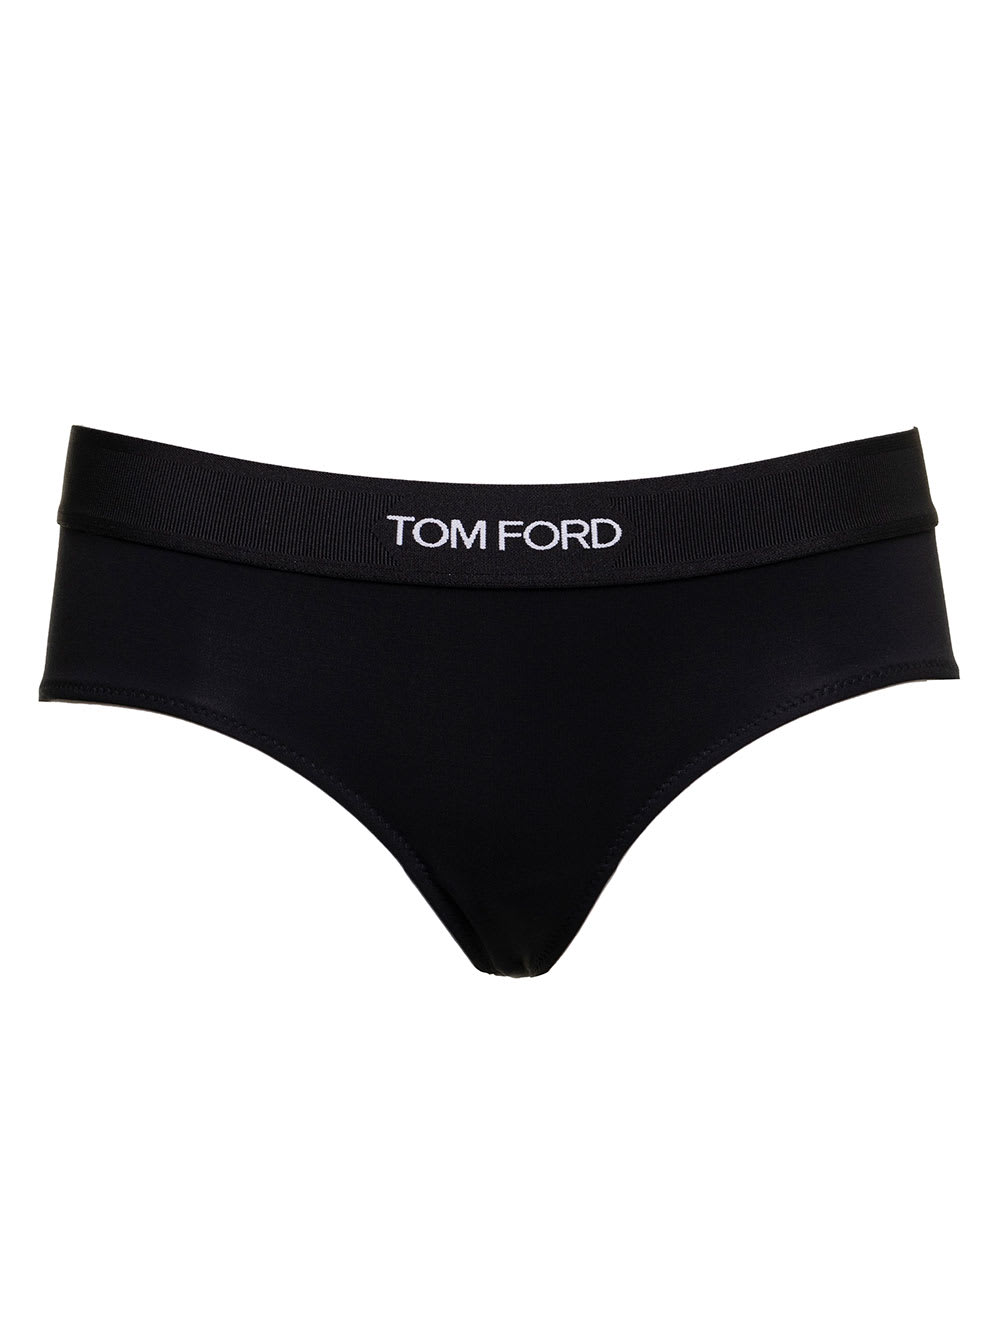 TOM FORD SIGNATURE BOY SHORT BLACK BRIEFS WITH LOGO WAISTBAND IN STRETCH-JERSEY WOMAN